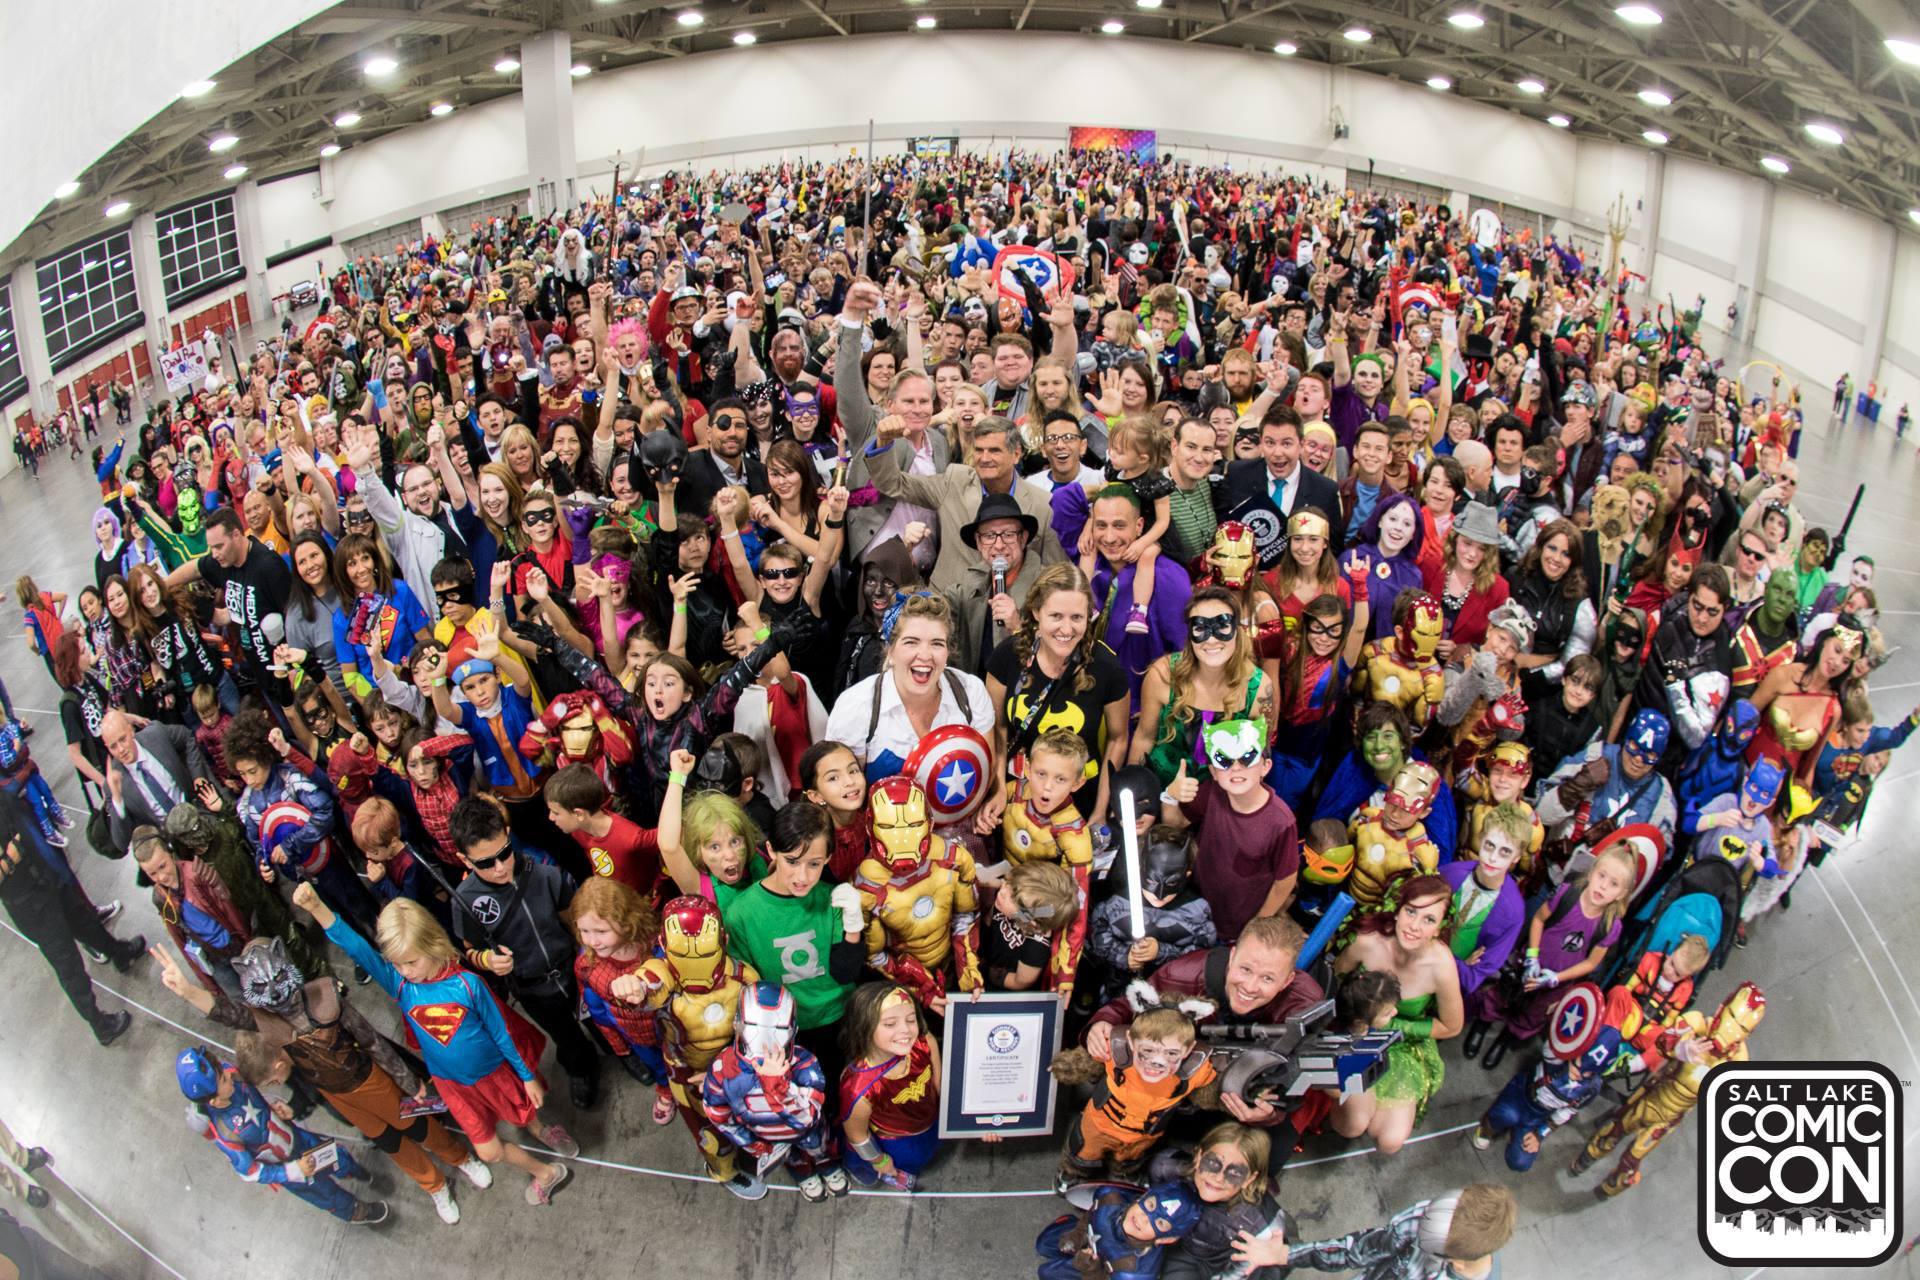 1784! Salt Lake Comic Con’s Magic Number for New Guinness World Record